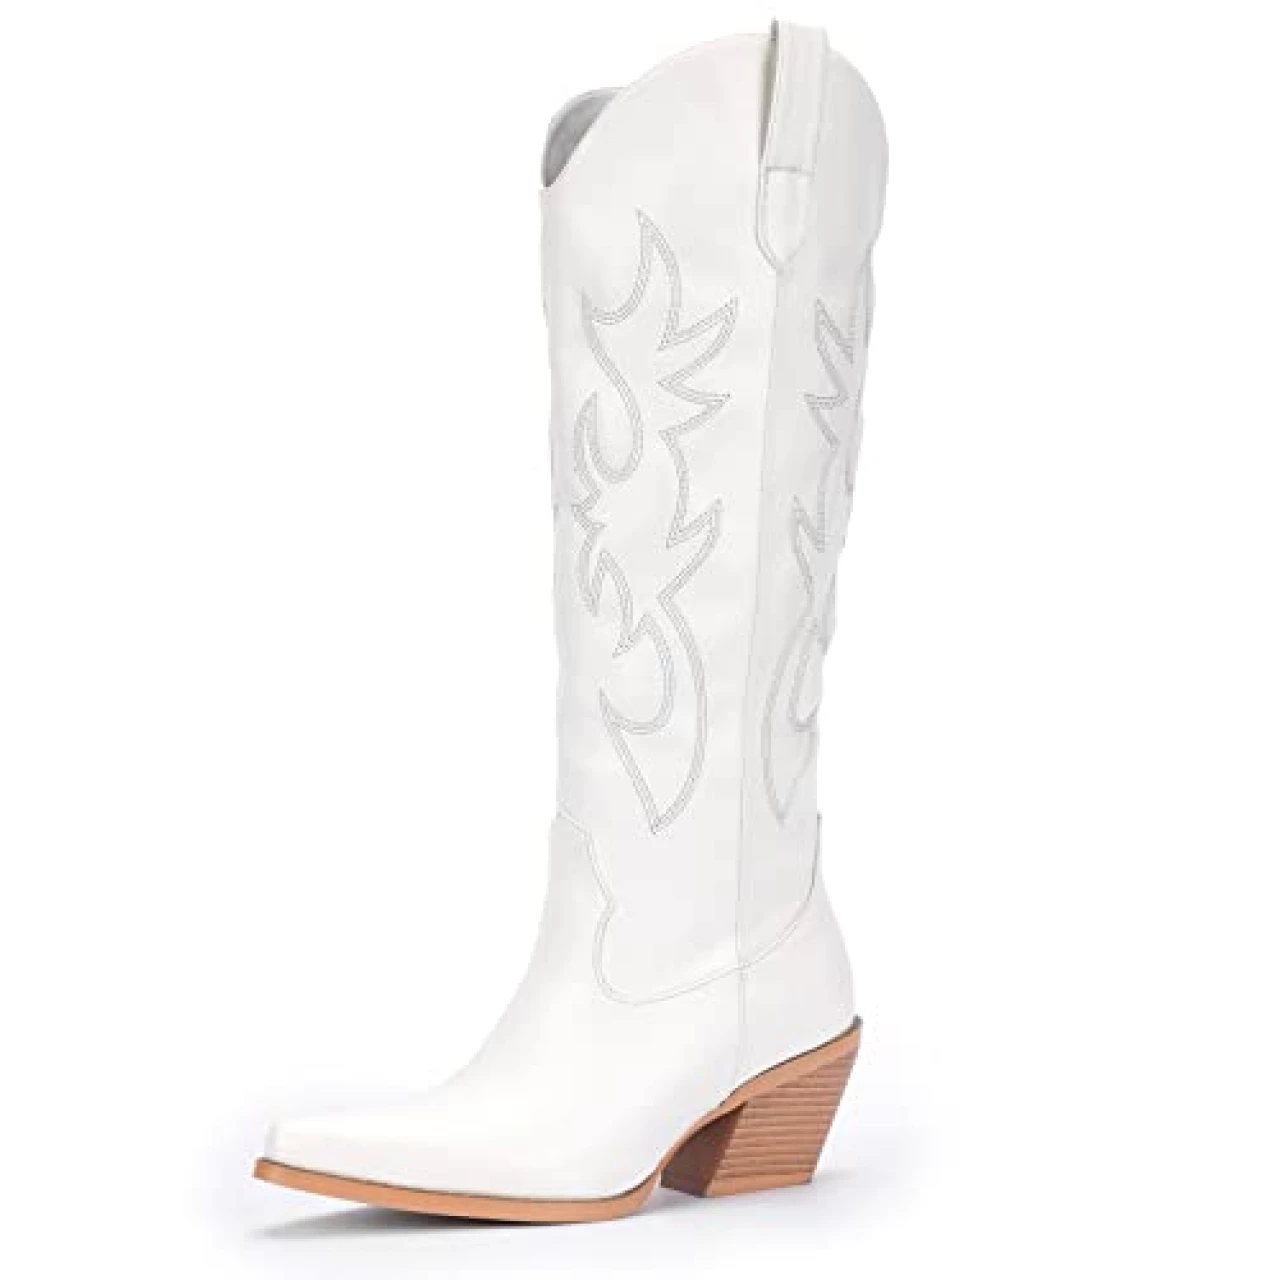 Pasuot White Cowboy Boots for Women - Wide Calf Cowgirl Knee High Western Boots with Side Zip and Embroidered, Pointed Toe Chunky Heel Retro Classic Tall Boot Pull On for Ladies Fall Winter Size 7.5